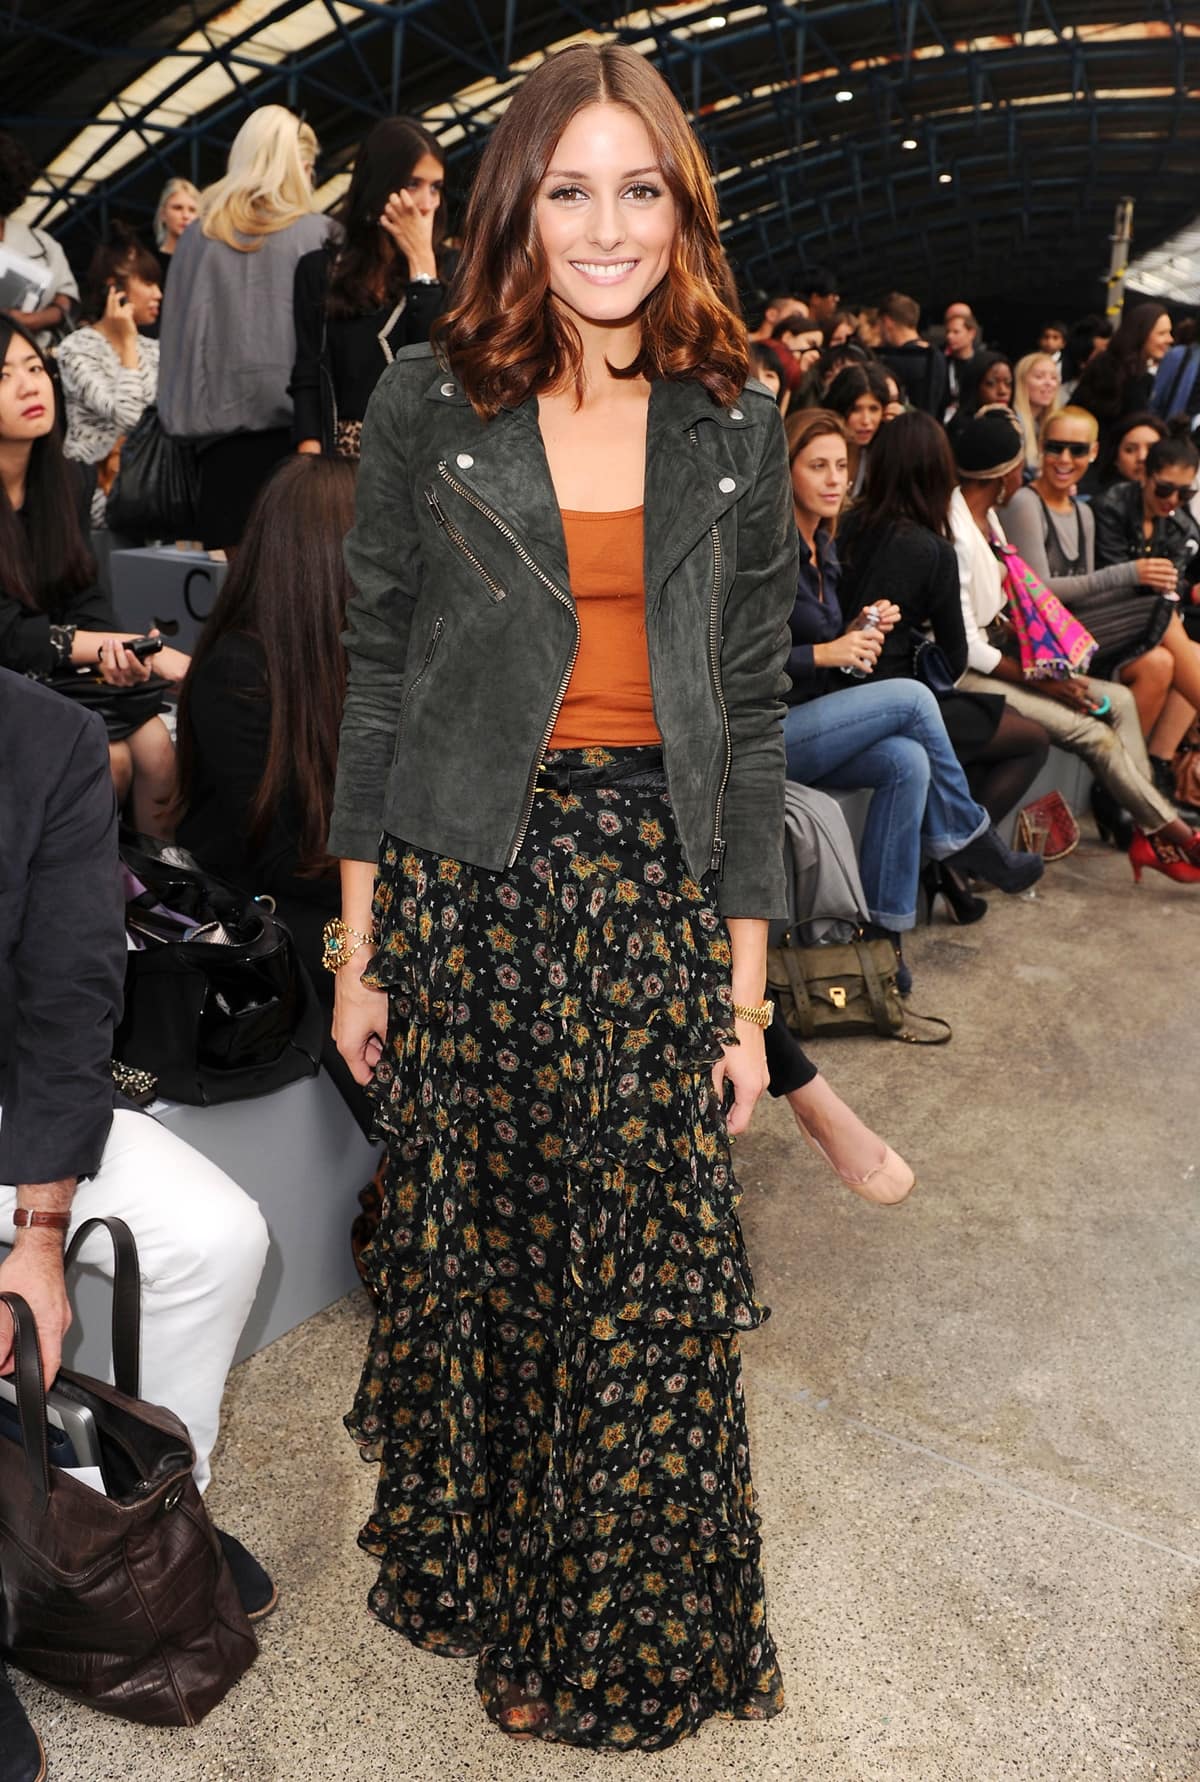 Olivia Palermo wears a suede biker jacket with a tier maxi skirt at the TopShop 'Unique' Spring/Summer 2011 show at Waterloo Station as part of London Fashion Week